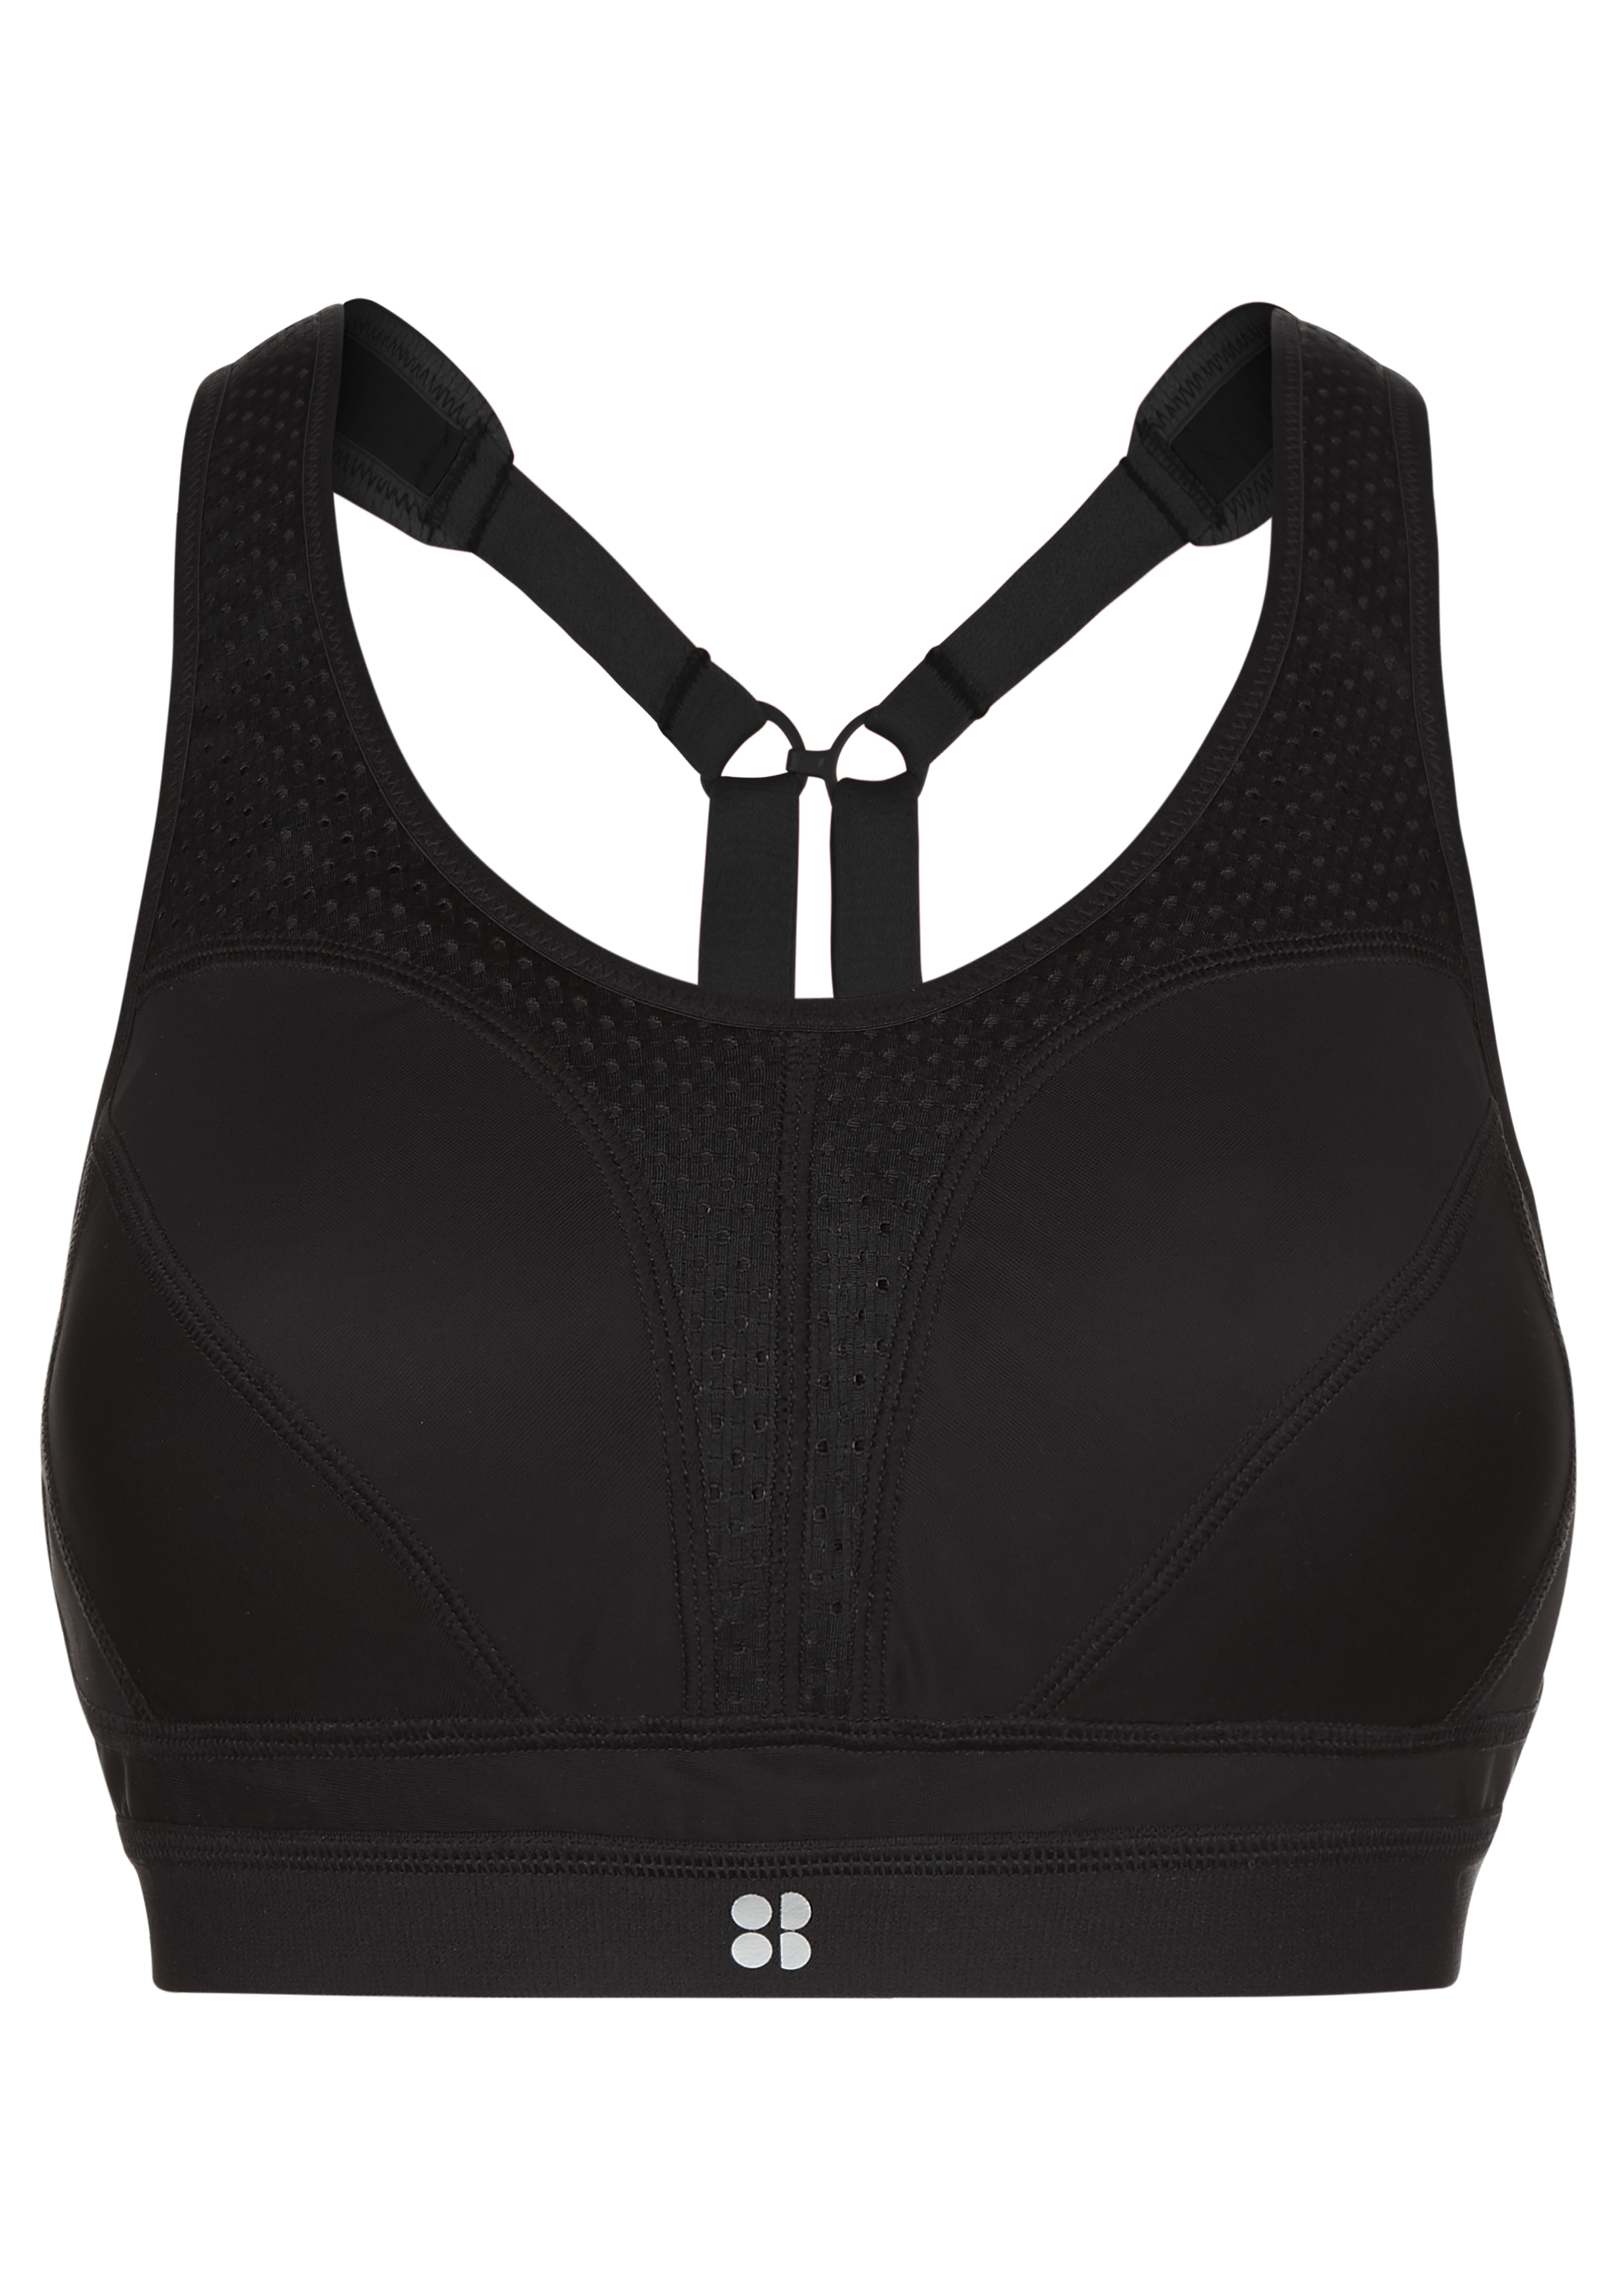 How Sweaty Betty Is Revolutionizing Sports Bras And Empowering Women Huffpost